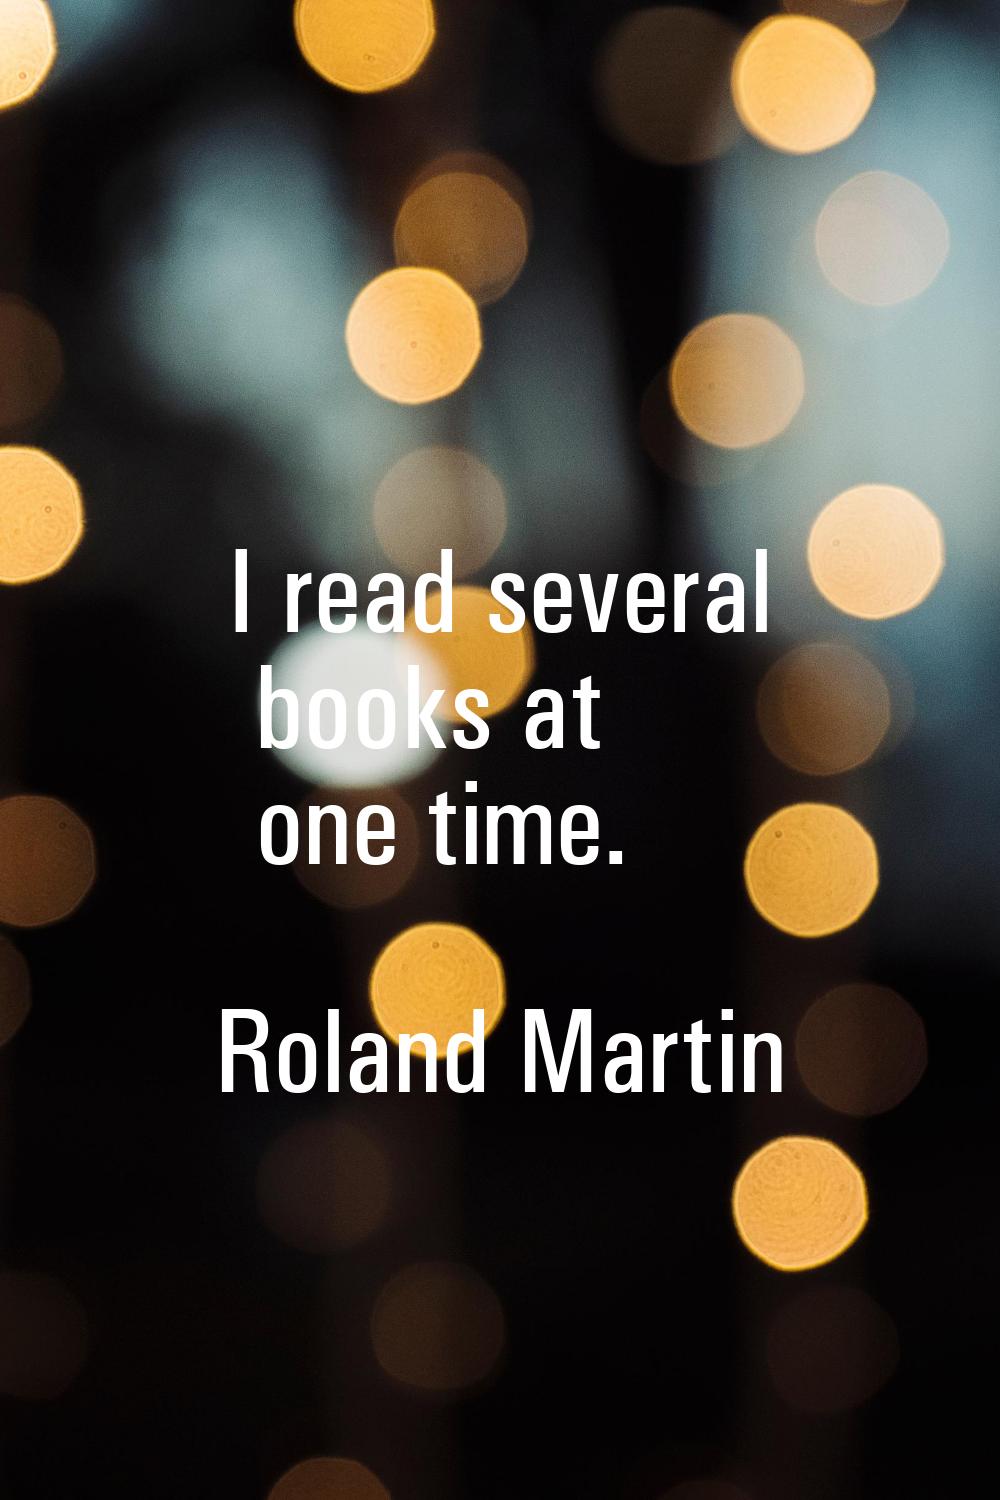 I read several books at one time.